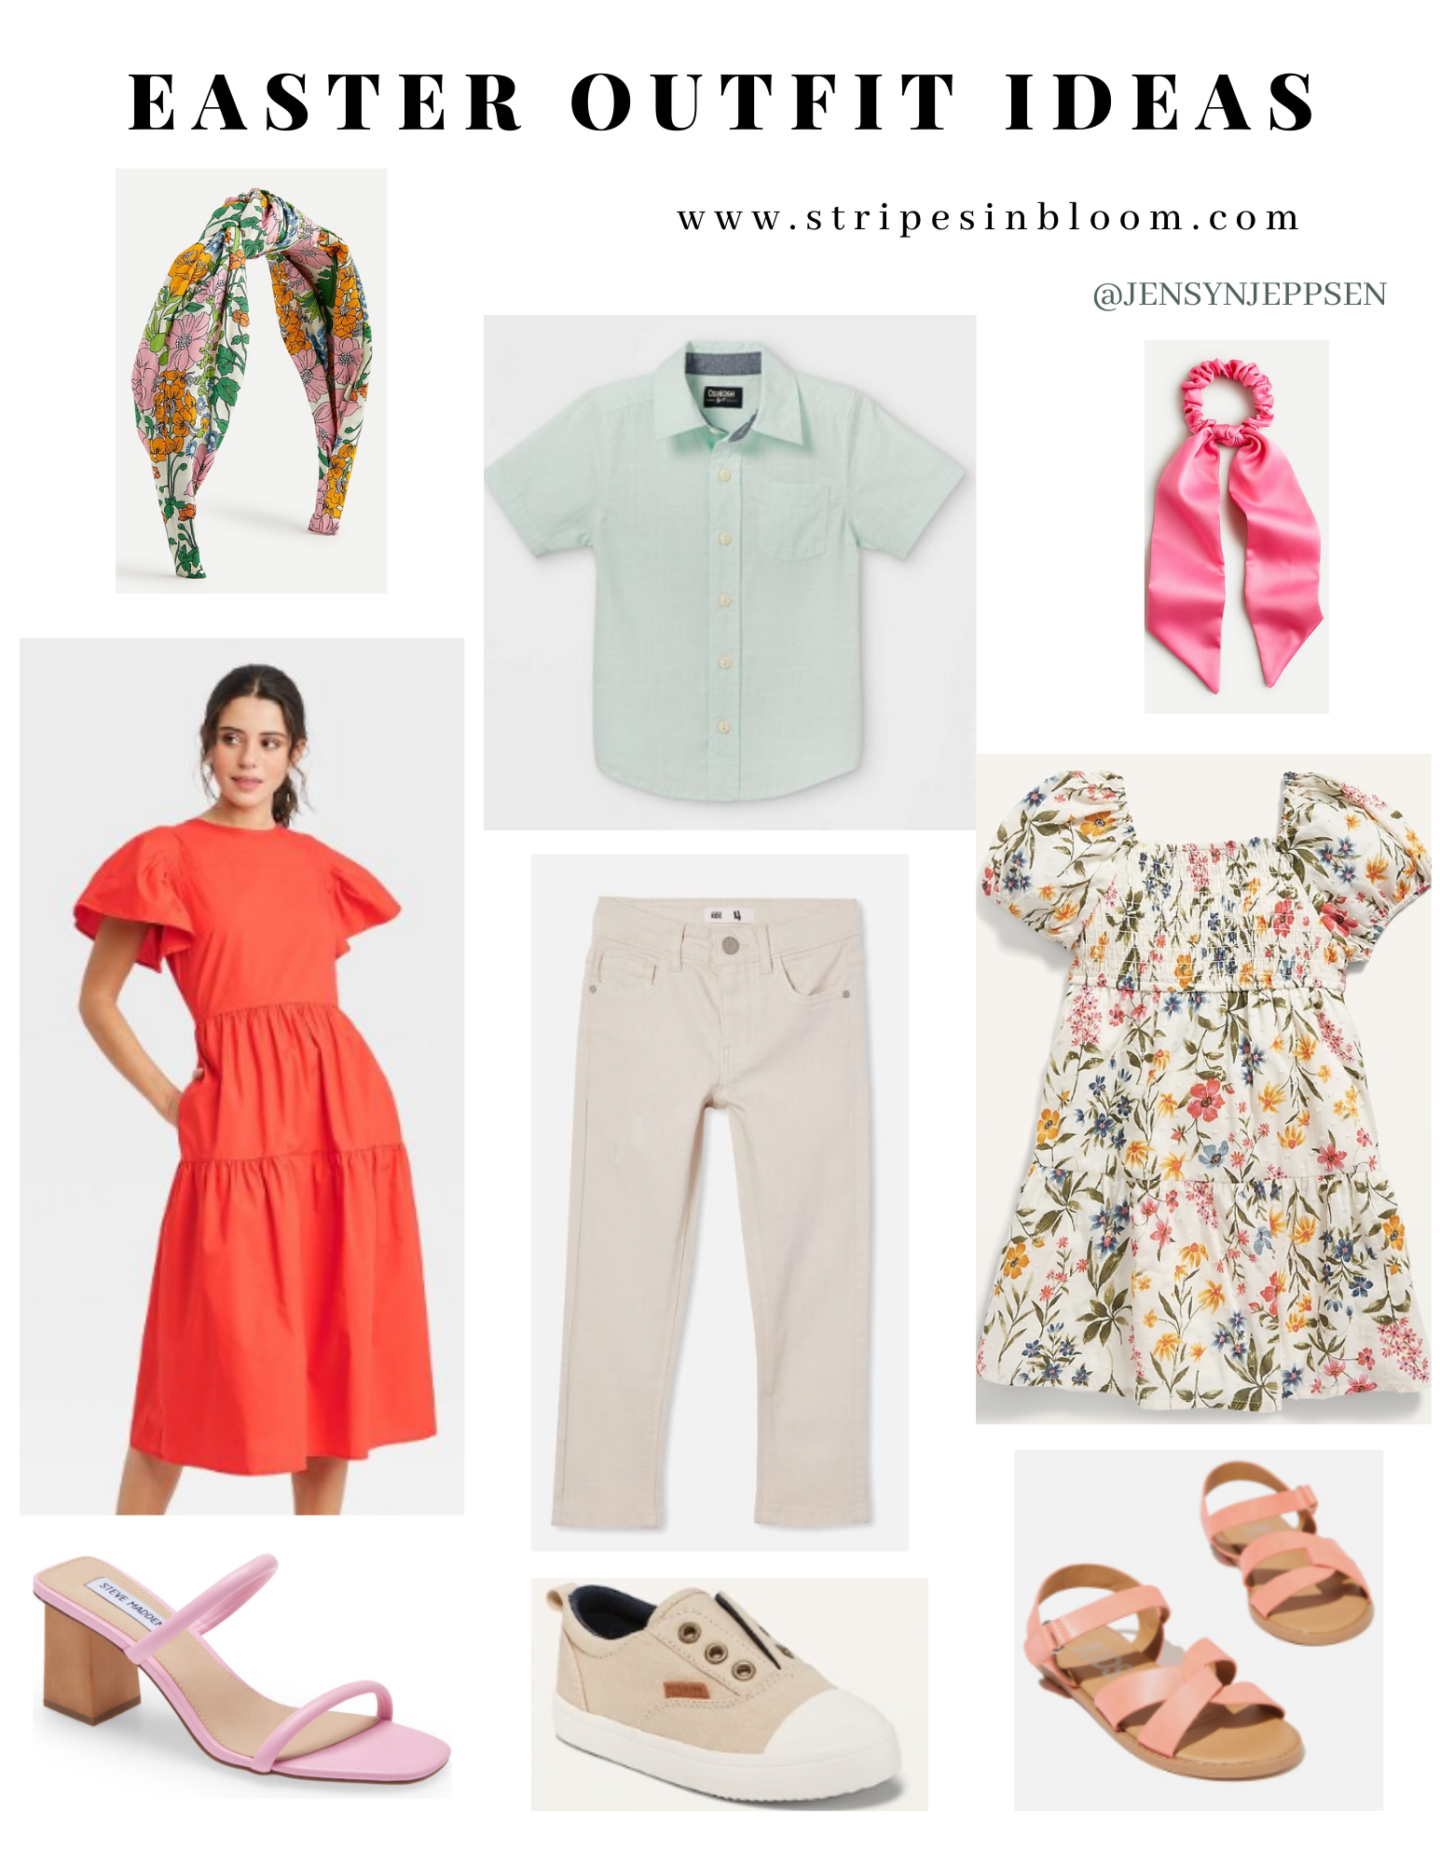 EASTER SUNDAY OUTFITS + GIFT IDEAS ...